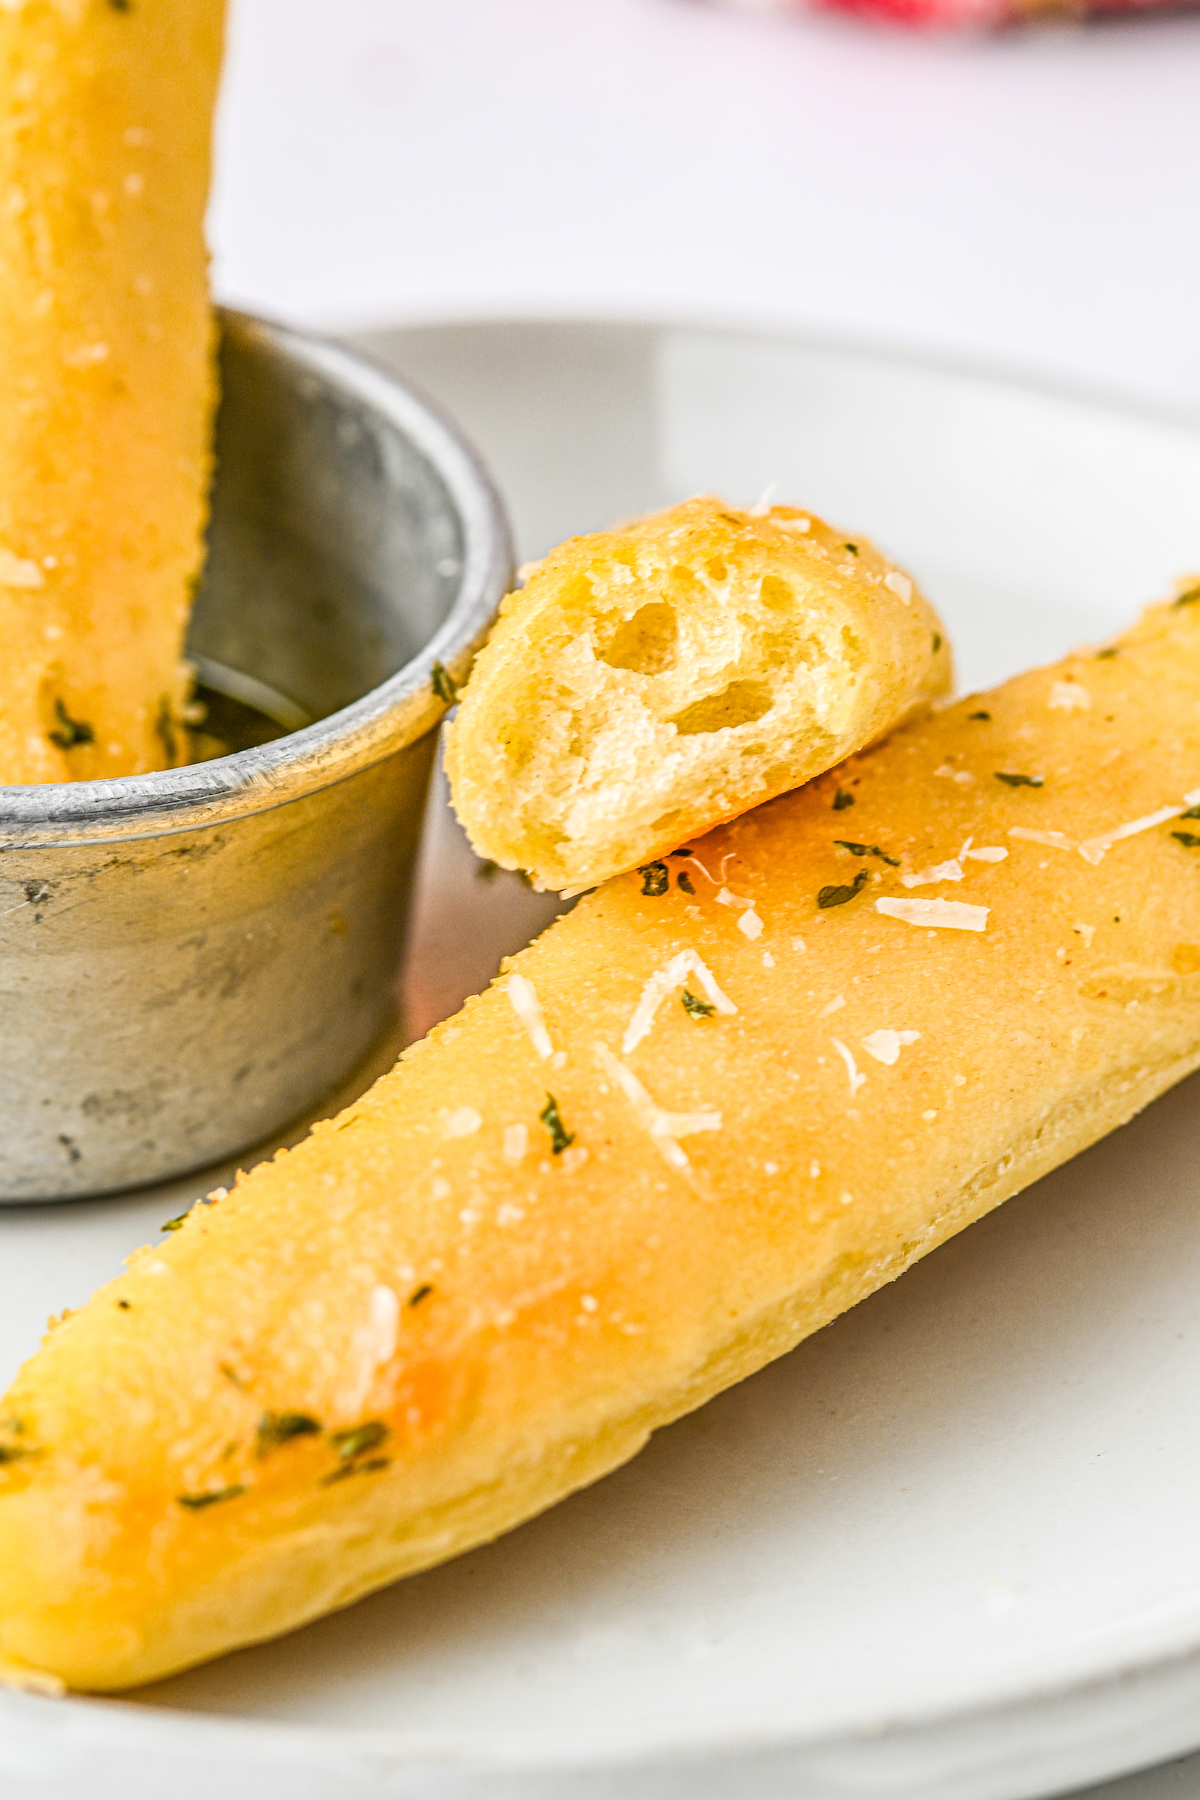 Breadsticks on a plate. One has been broken in half and turned toward the camera, to show the texture.